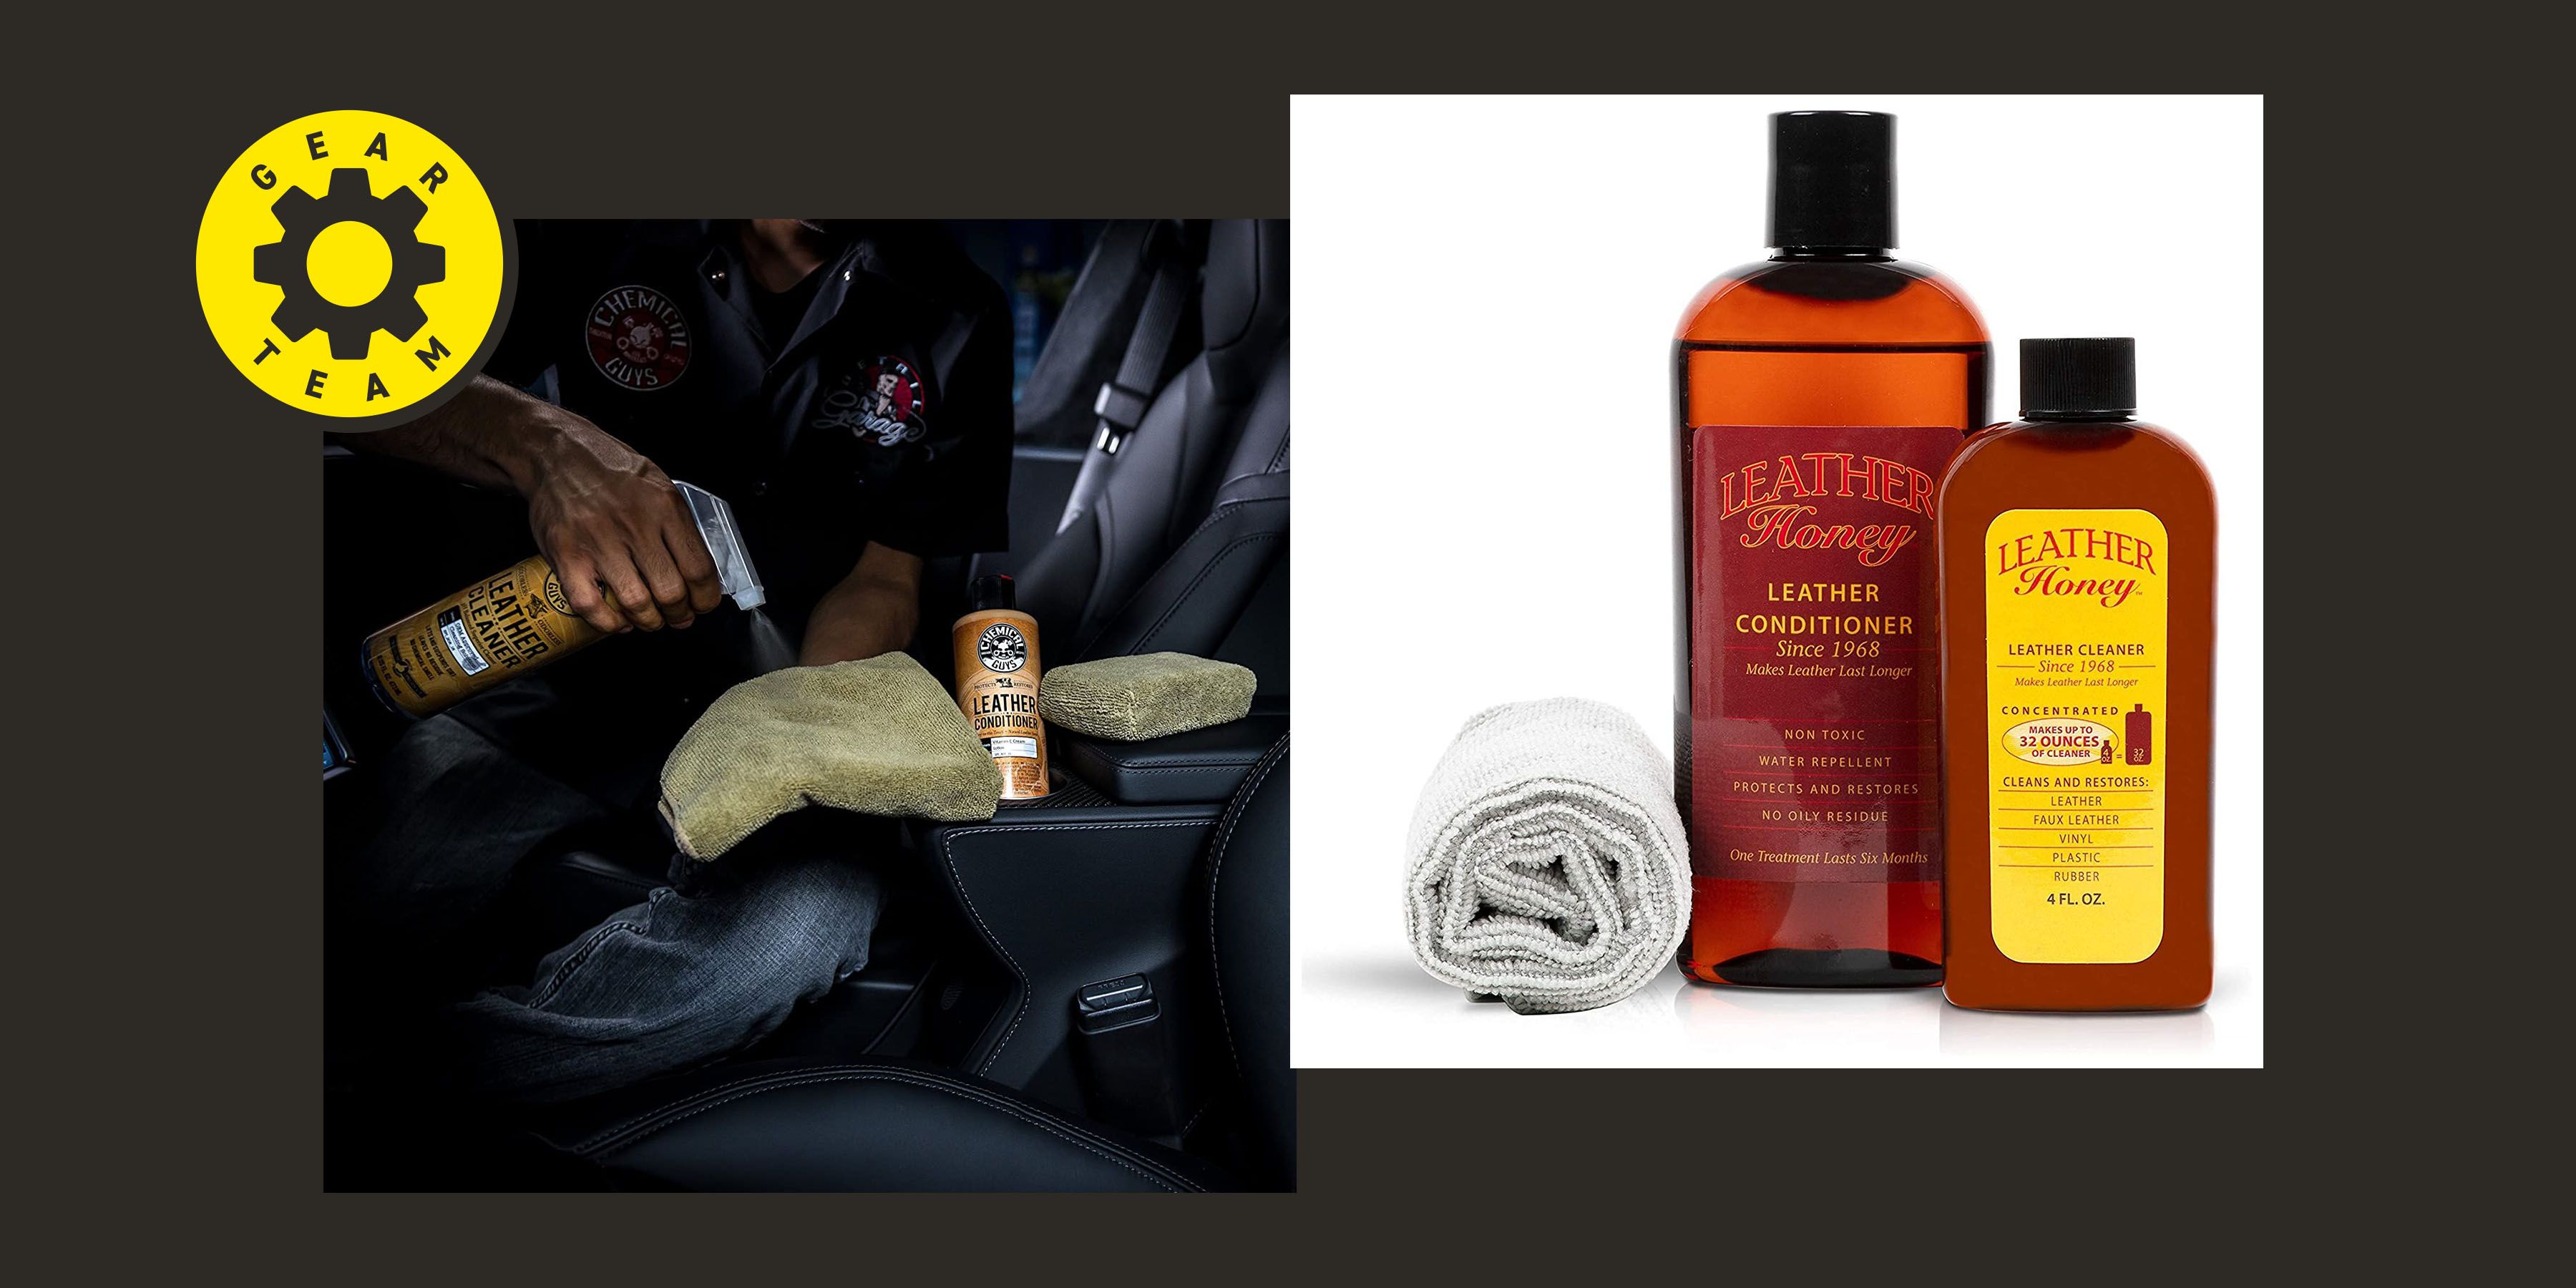 How to Choose the Right Leather Cleaning Products for Your Car